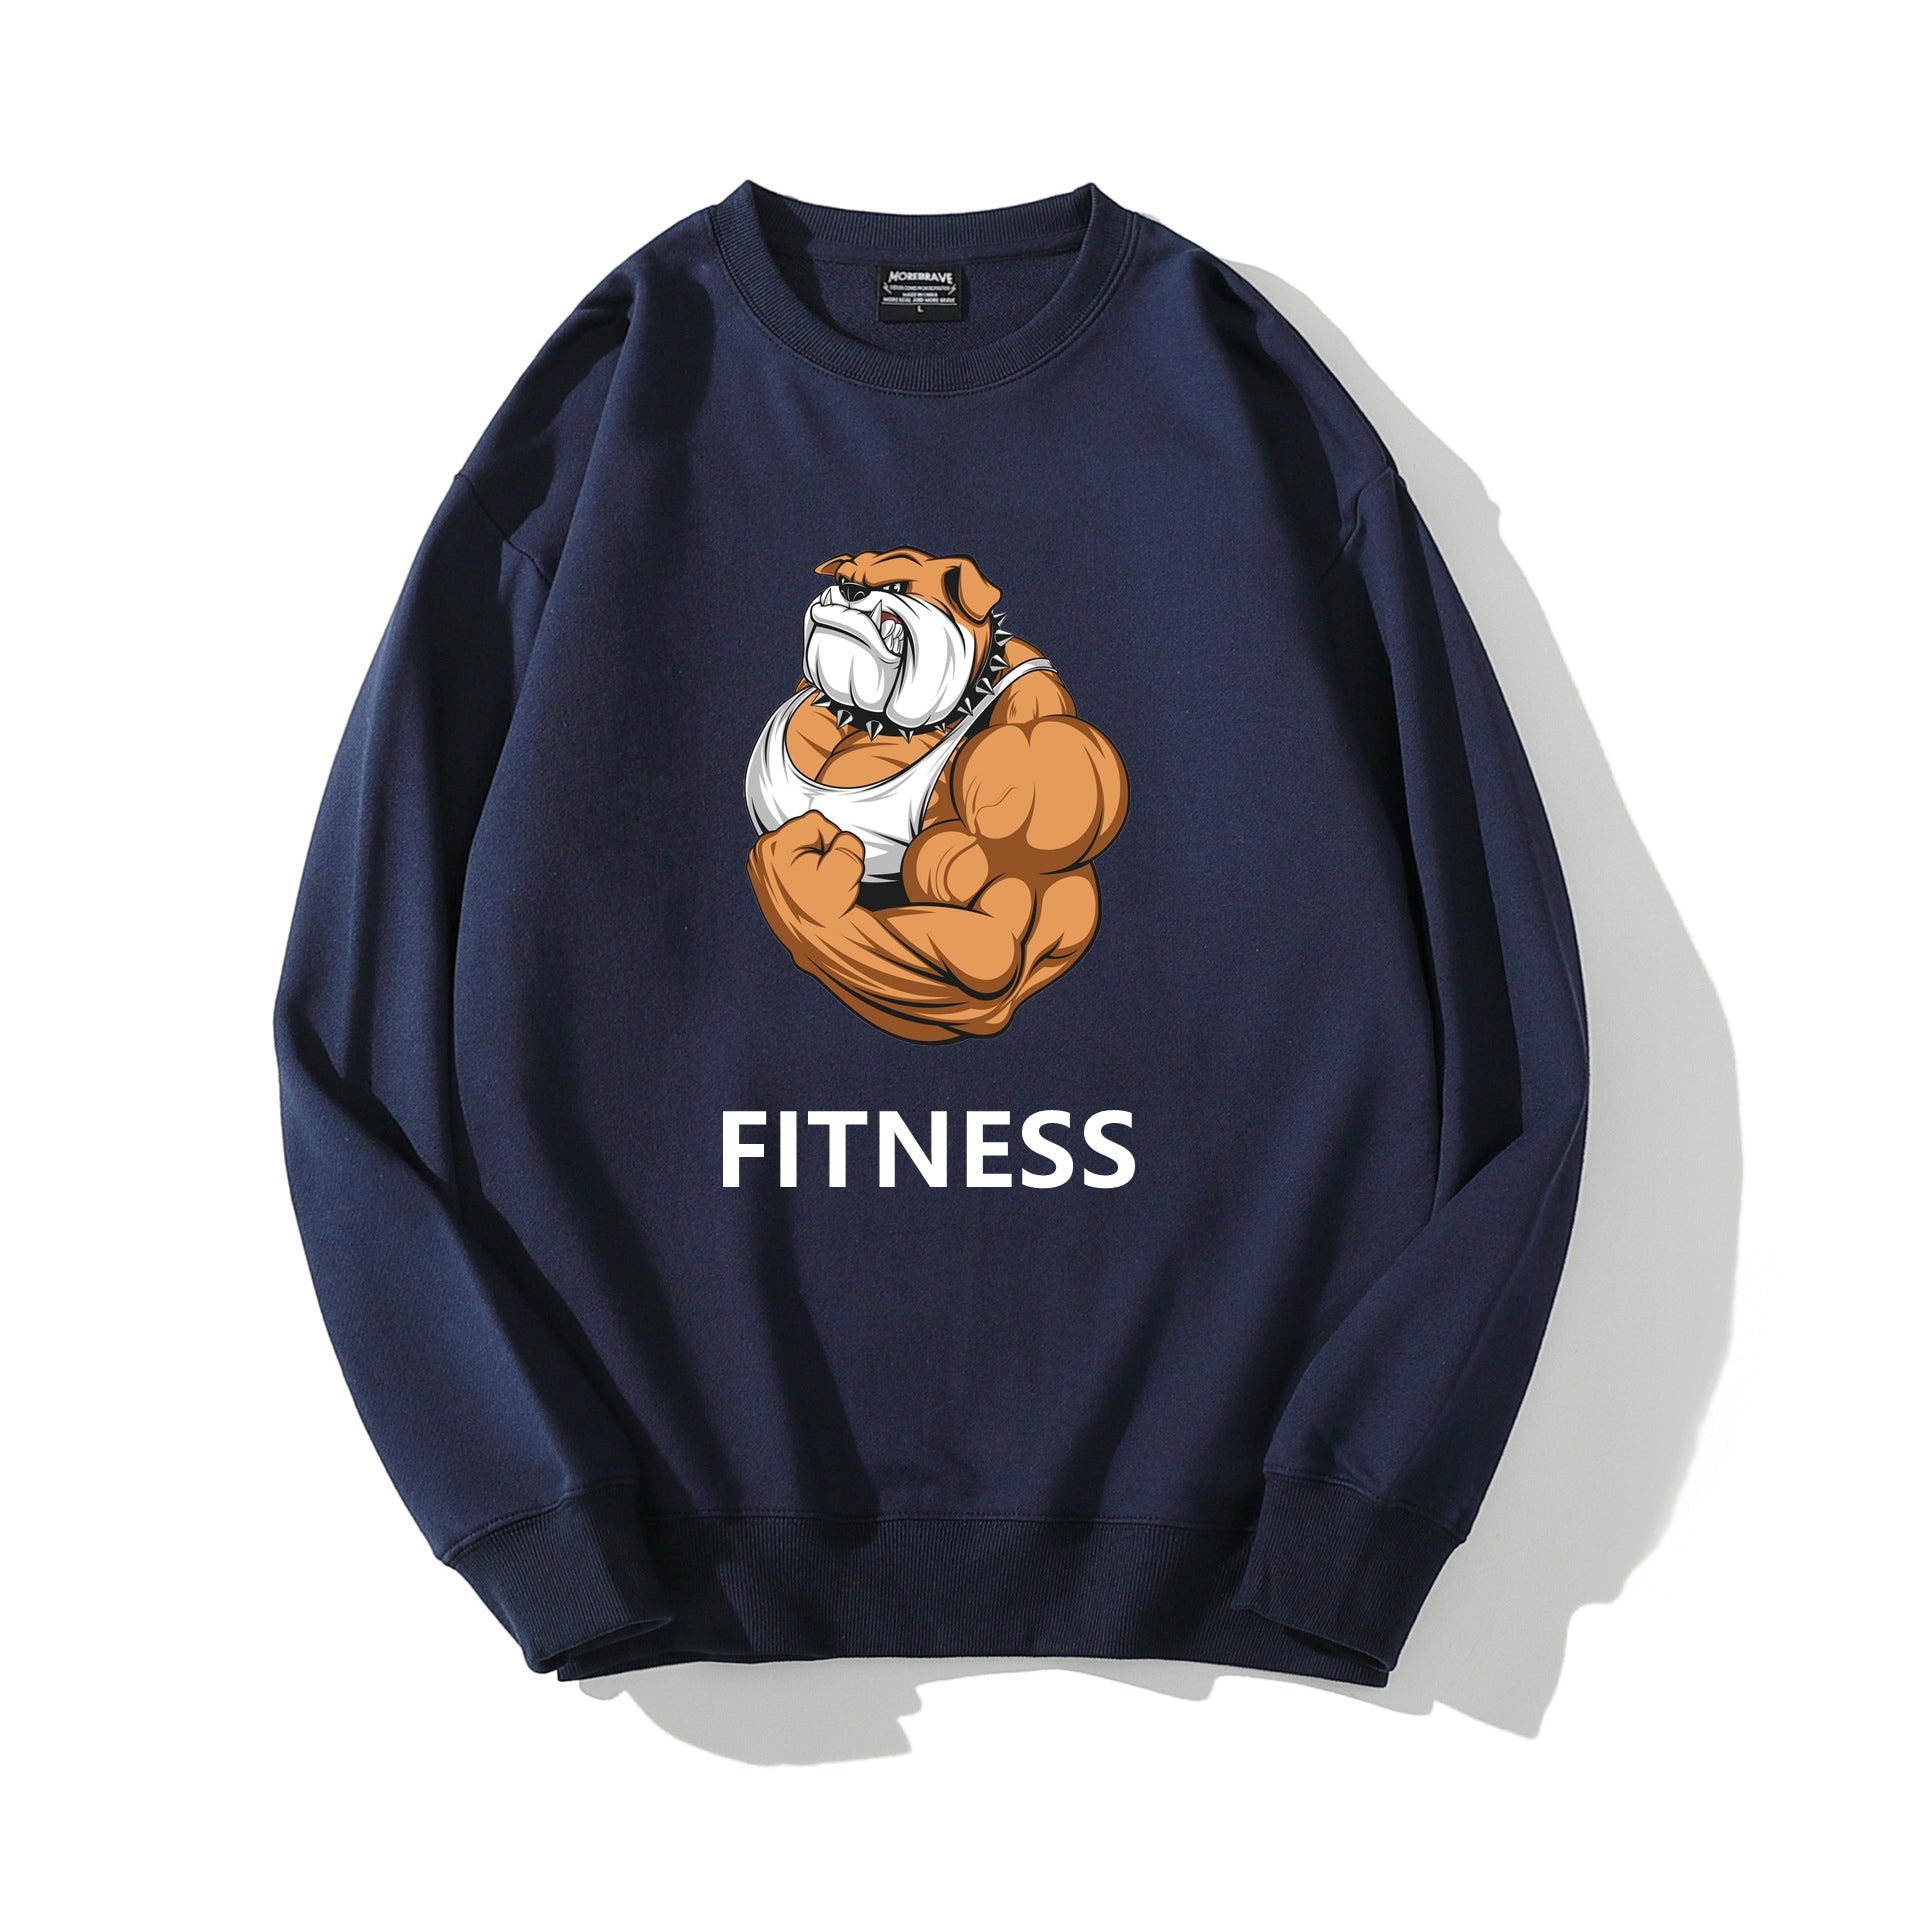 Workout Bulldog Sweater for Men Fitness Graphic Sweatshirt Ideal Gift